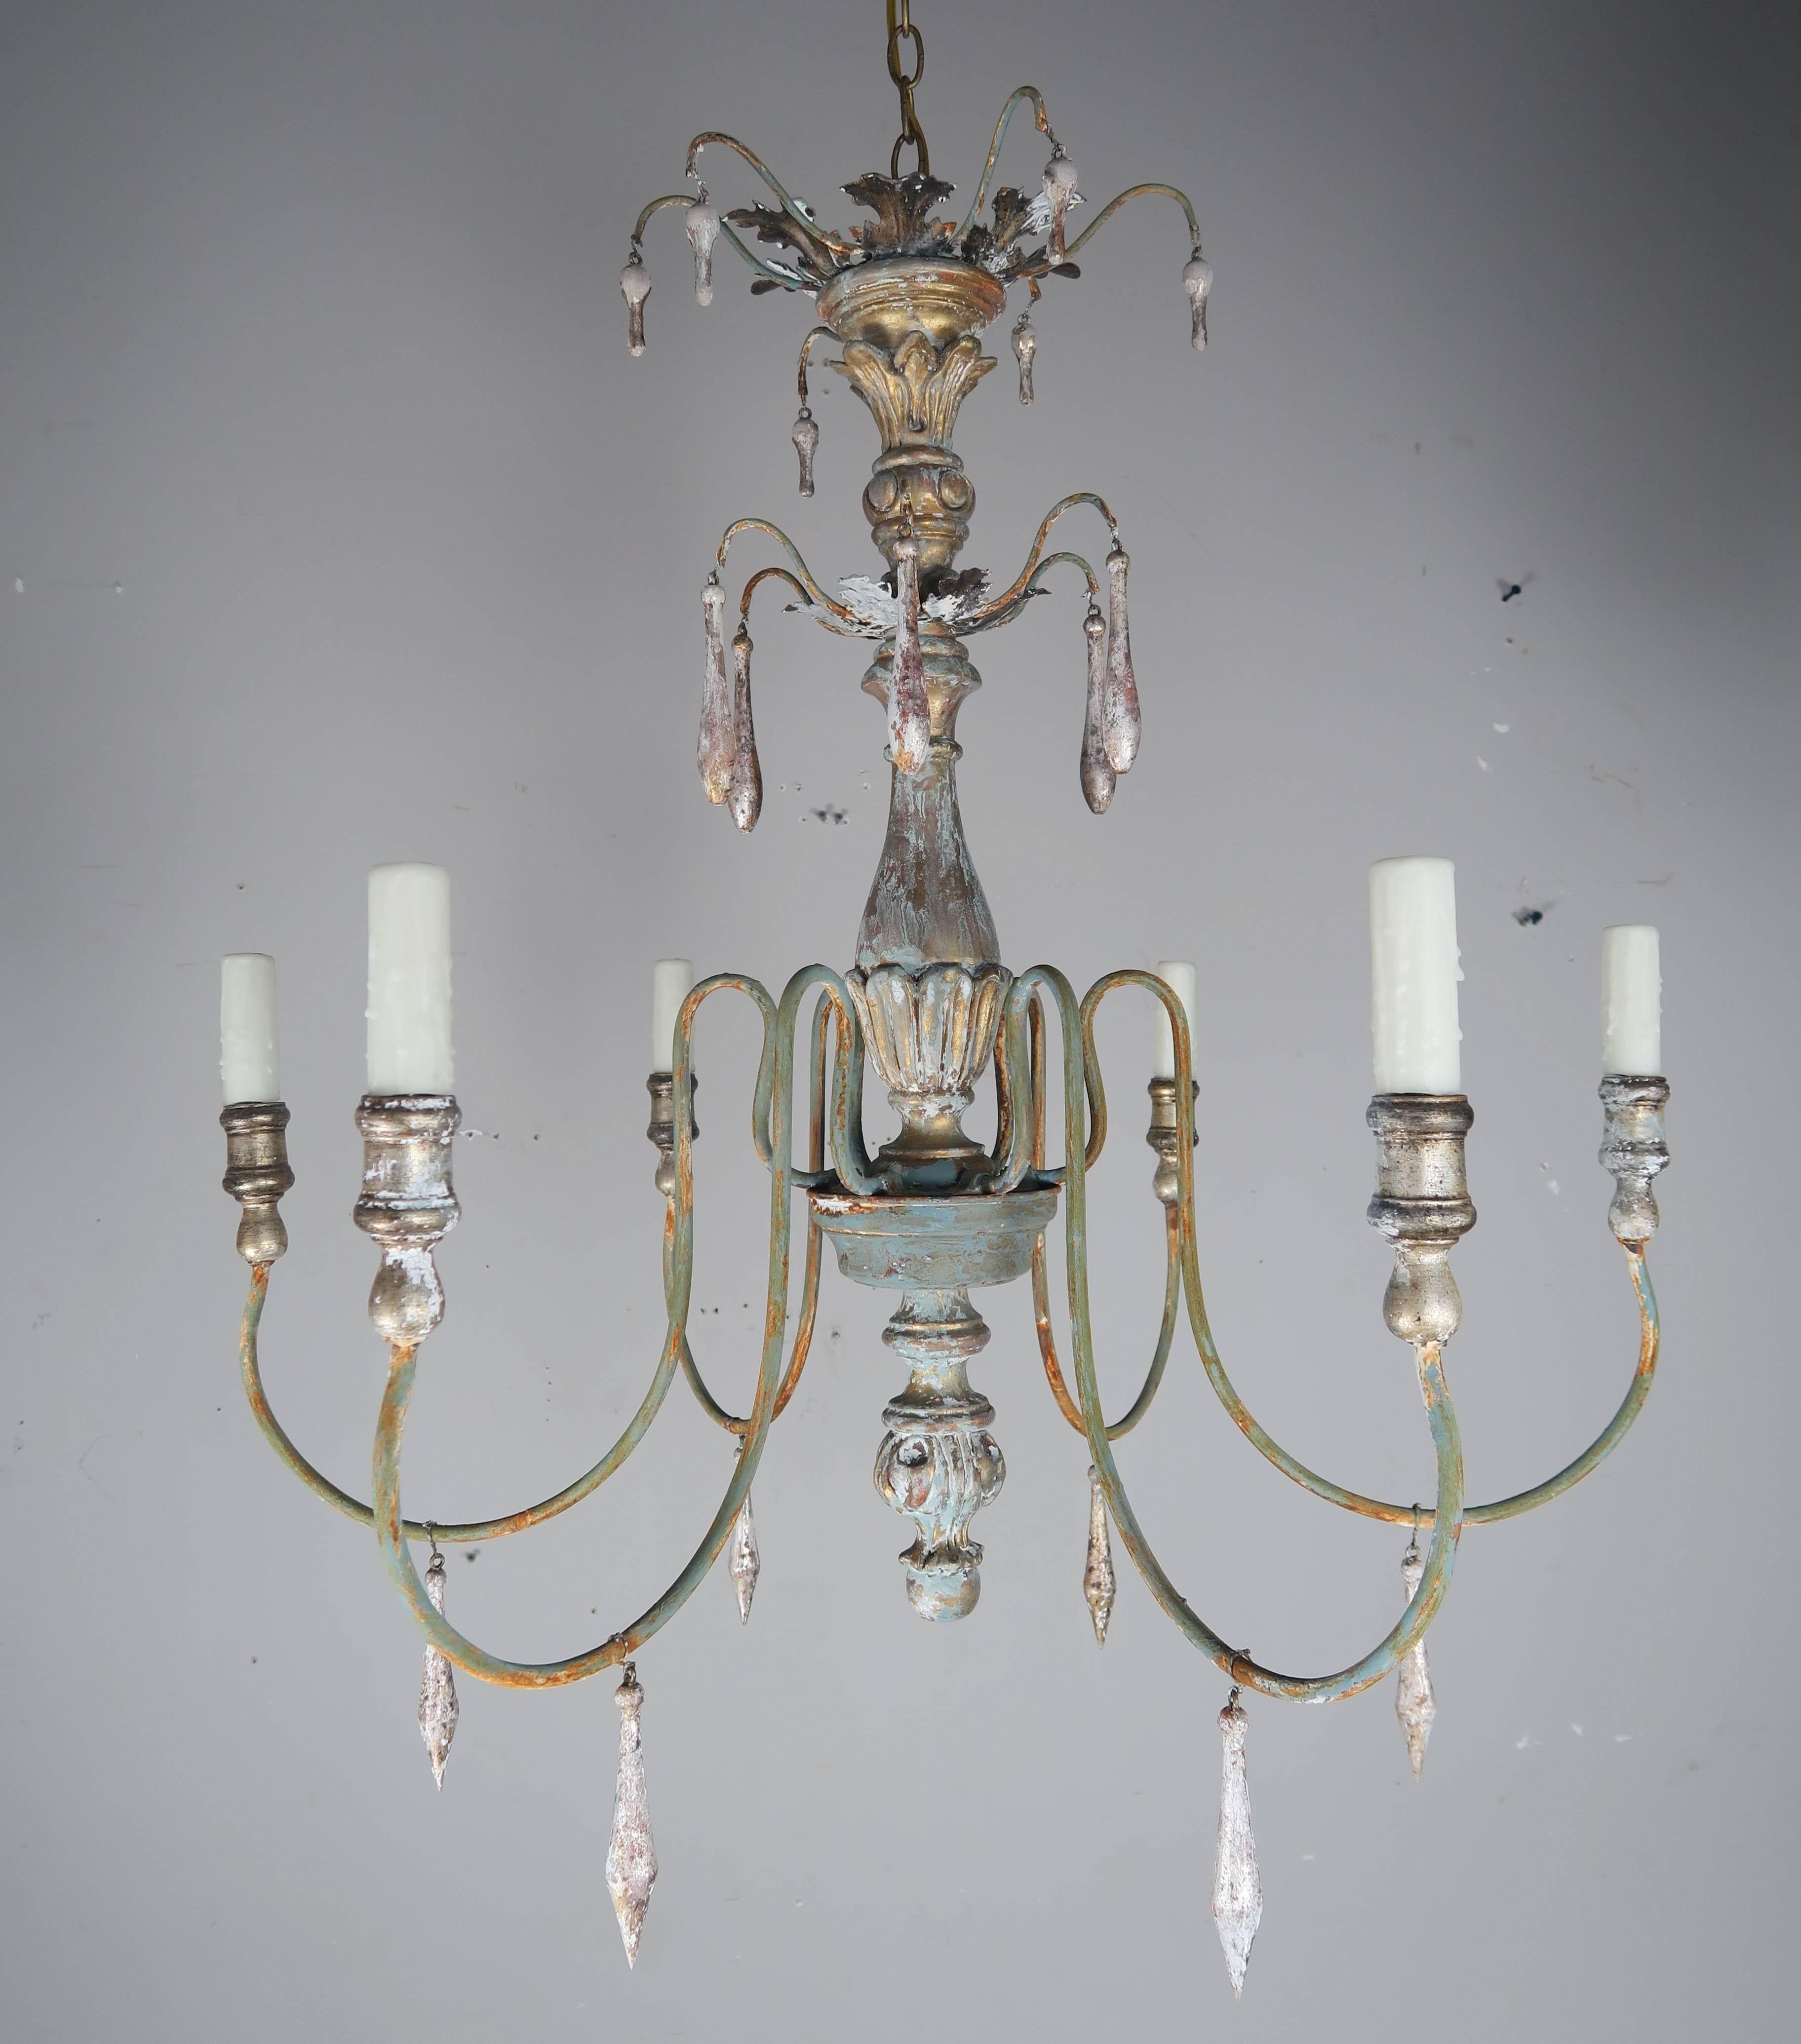 Six-light Italian painted grey wood and metal chandelier with gold and silver highlights throughout. Newly rewired with drip wax candle covers. Includes chain and canopy.